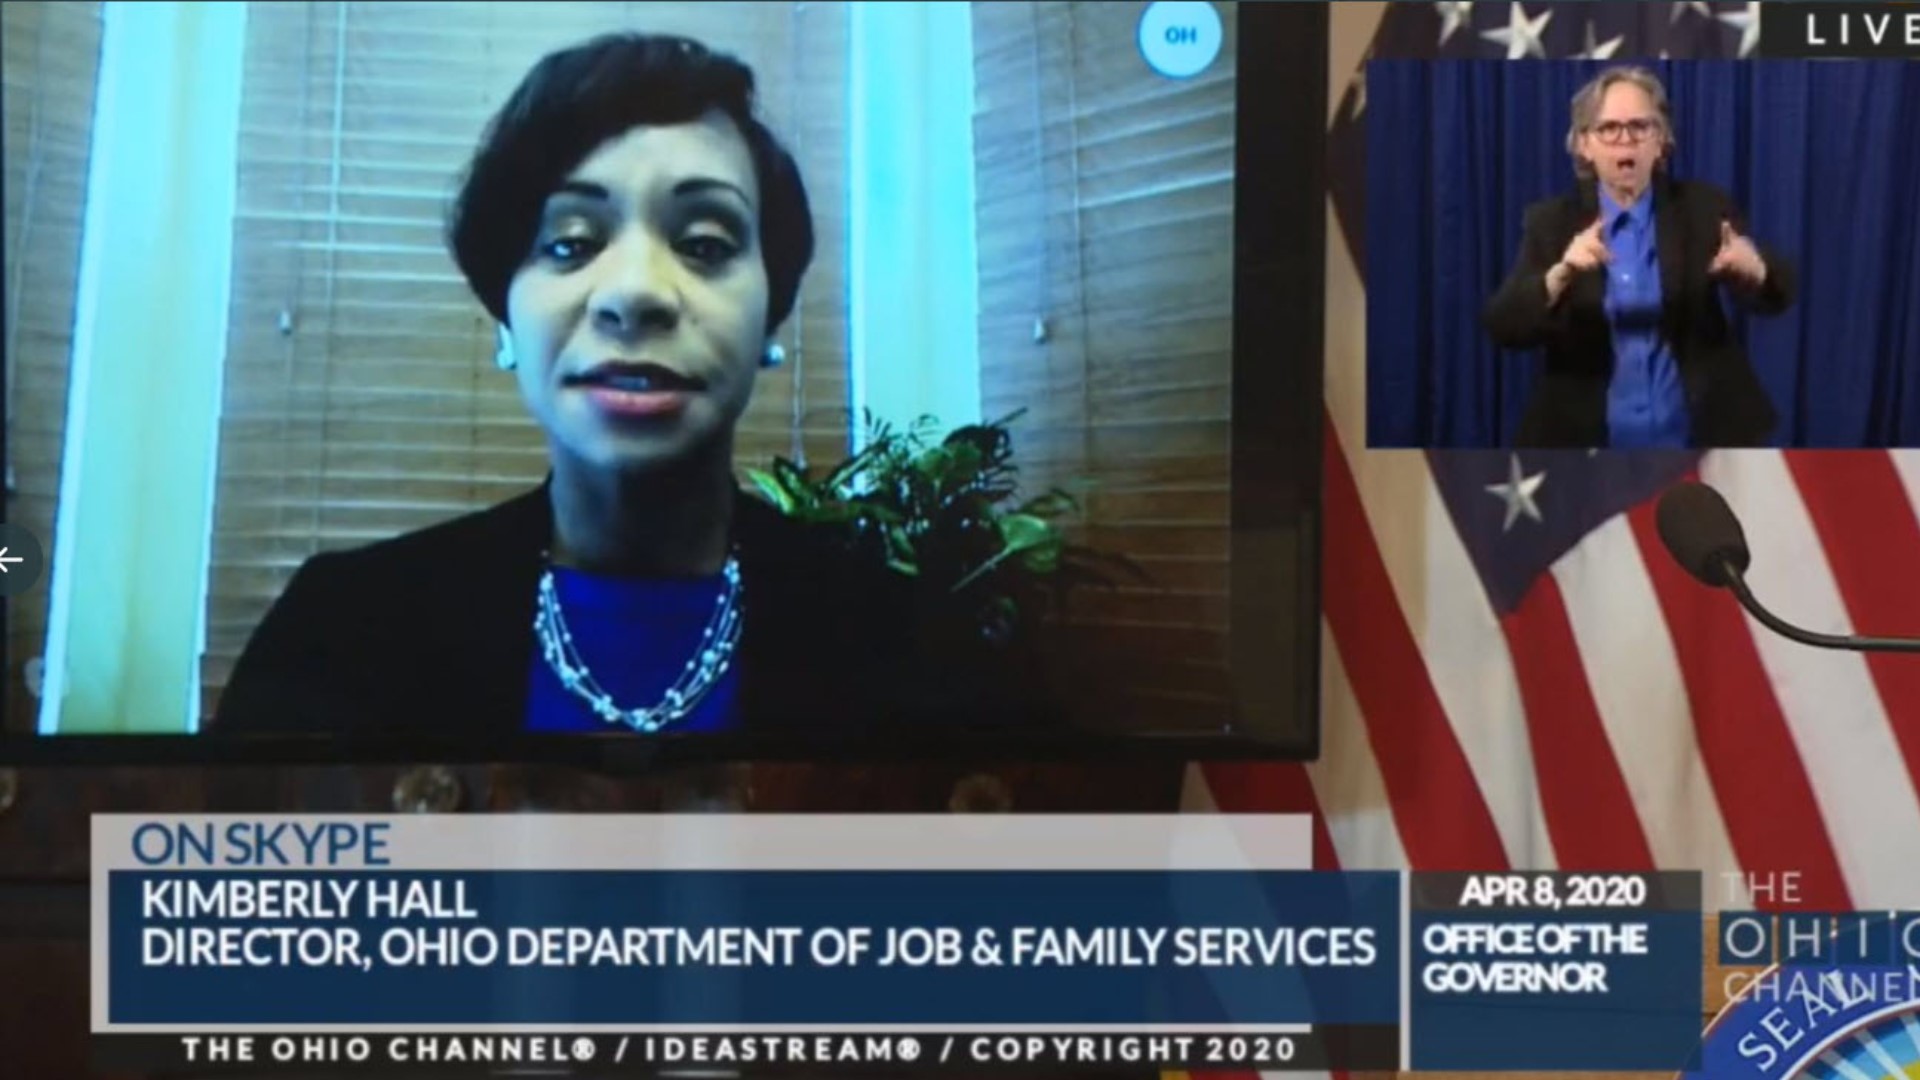 Director Kim Hall said 'We are working to meet the needs of workers who have experienced sudden unemployment.'